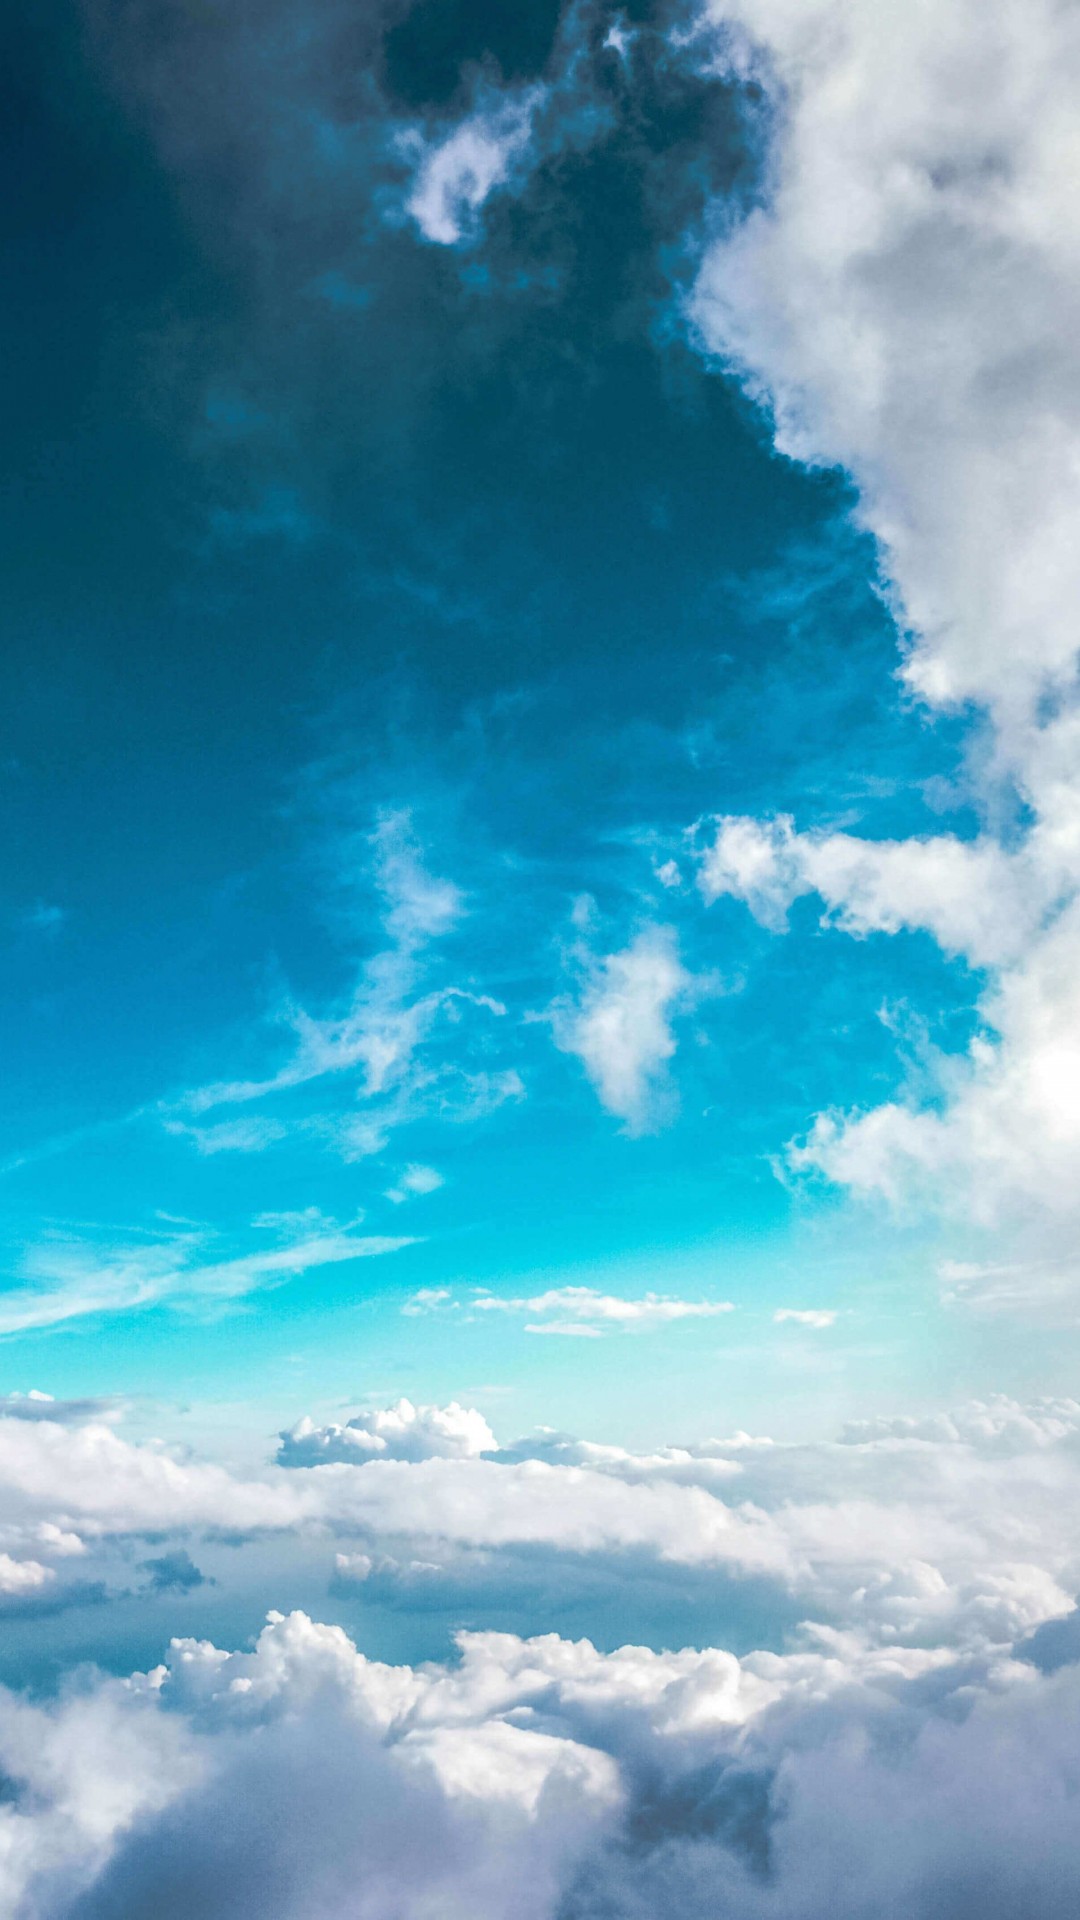 Cloudy Blue Sky Wallpaper for LG G2